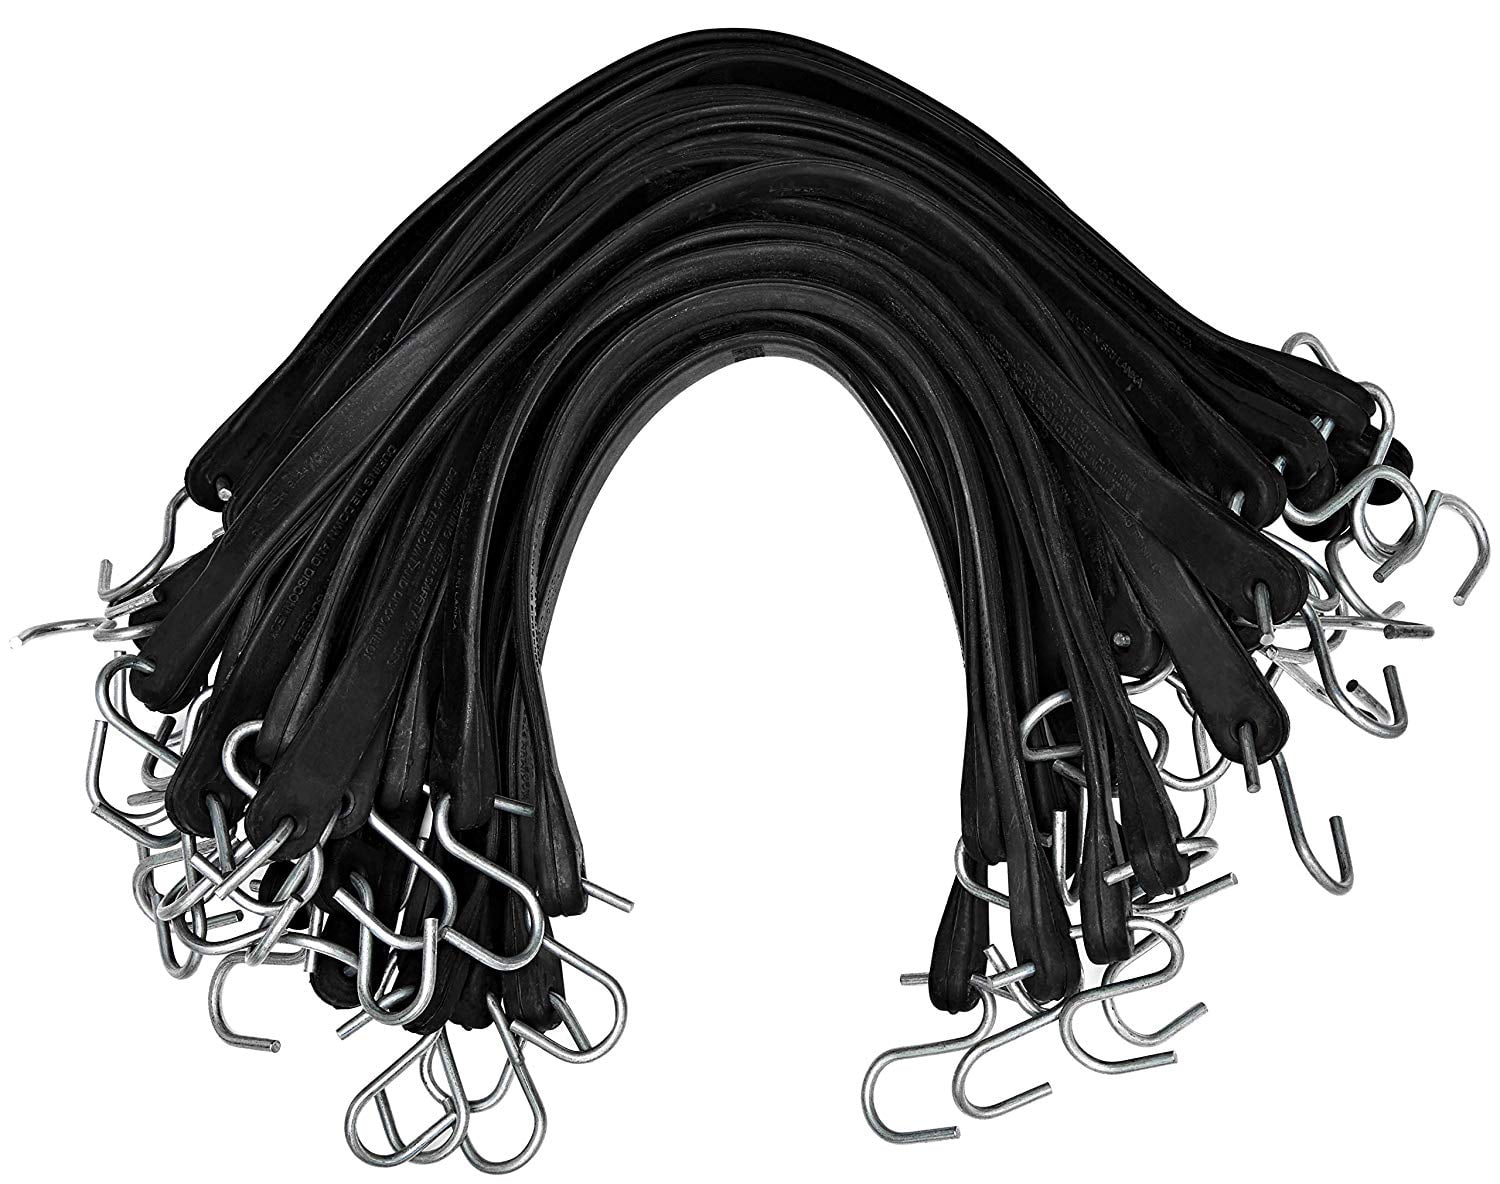 Heavy Duty 41" inch 100% Natural Rubber Bungee Strap 10 Pack Tie down Cord 